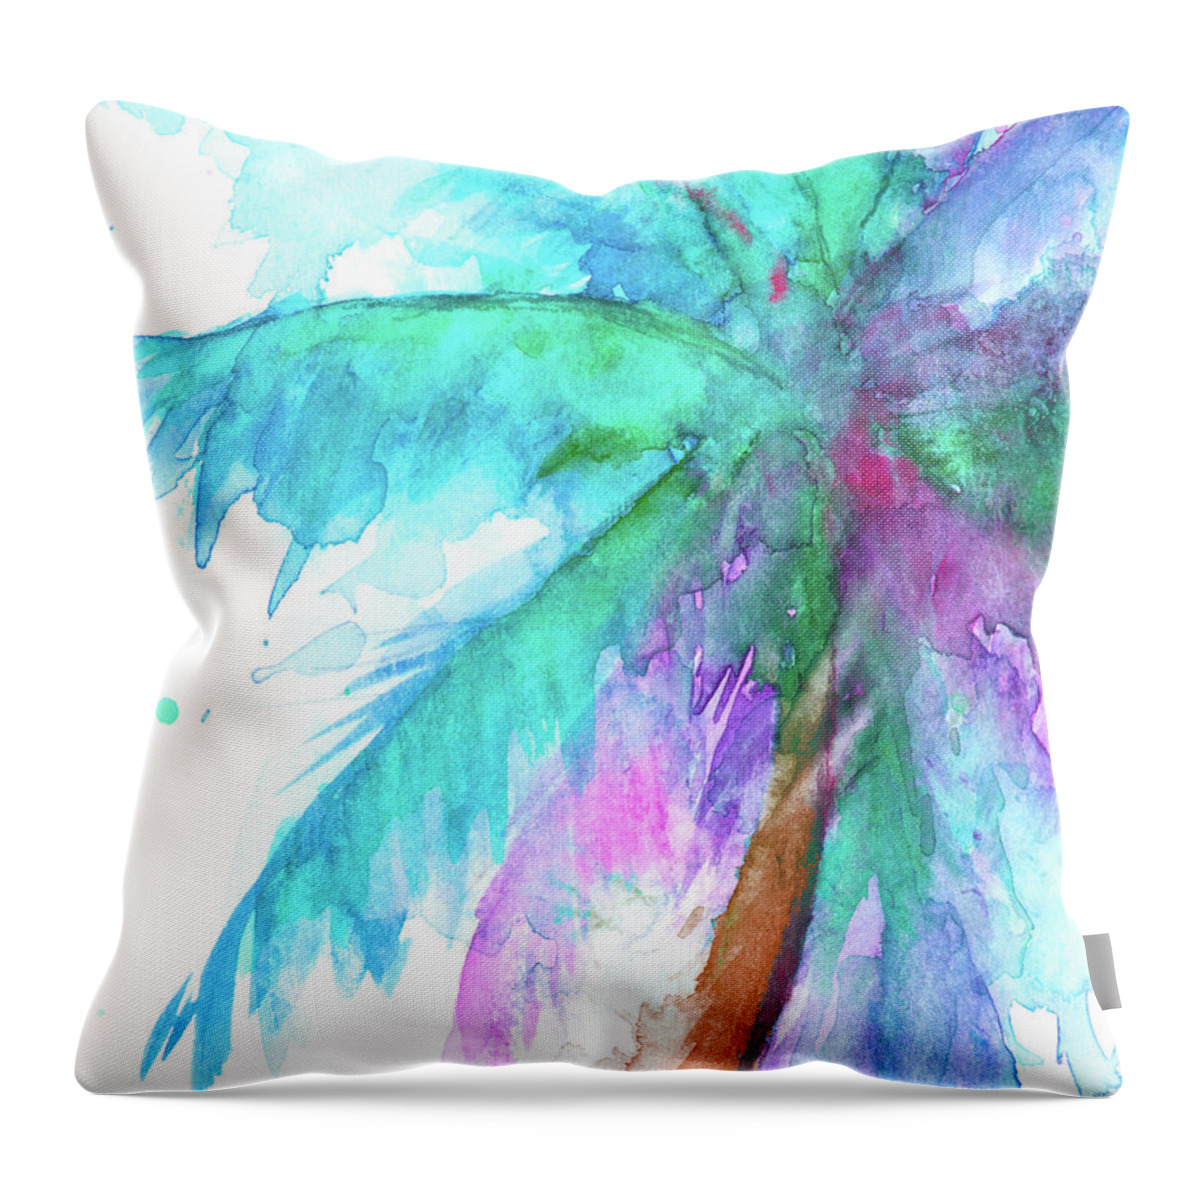 Colorful Throw Pillow featuring the painting Colorful Tropics I by Patricia Pinto